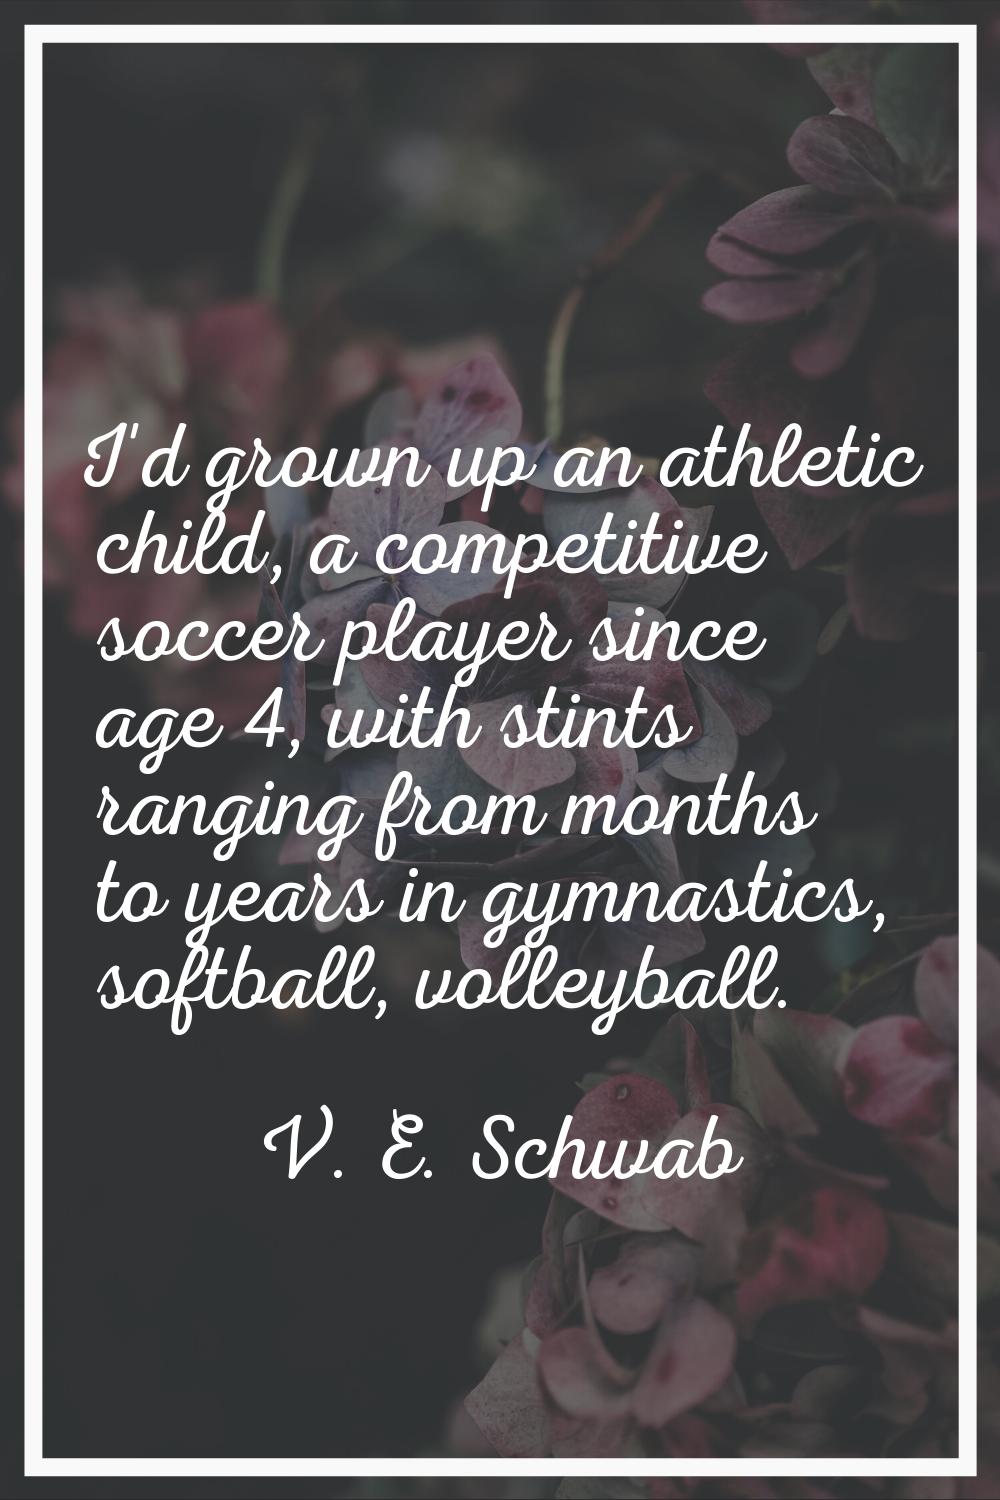 I'd grown up an athletic child, a competitive soccer player since age 4, with stints ranging from m